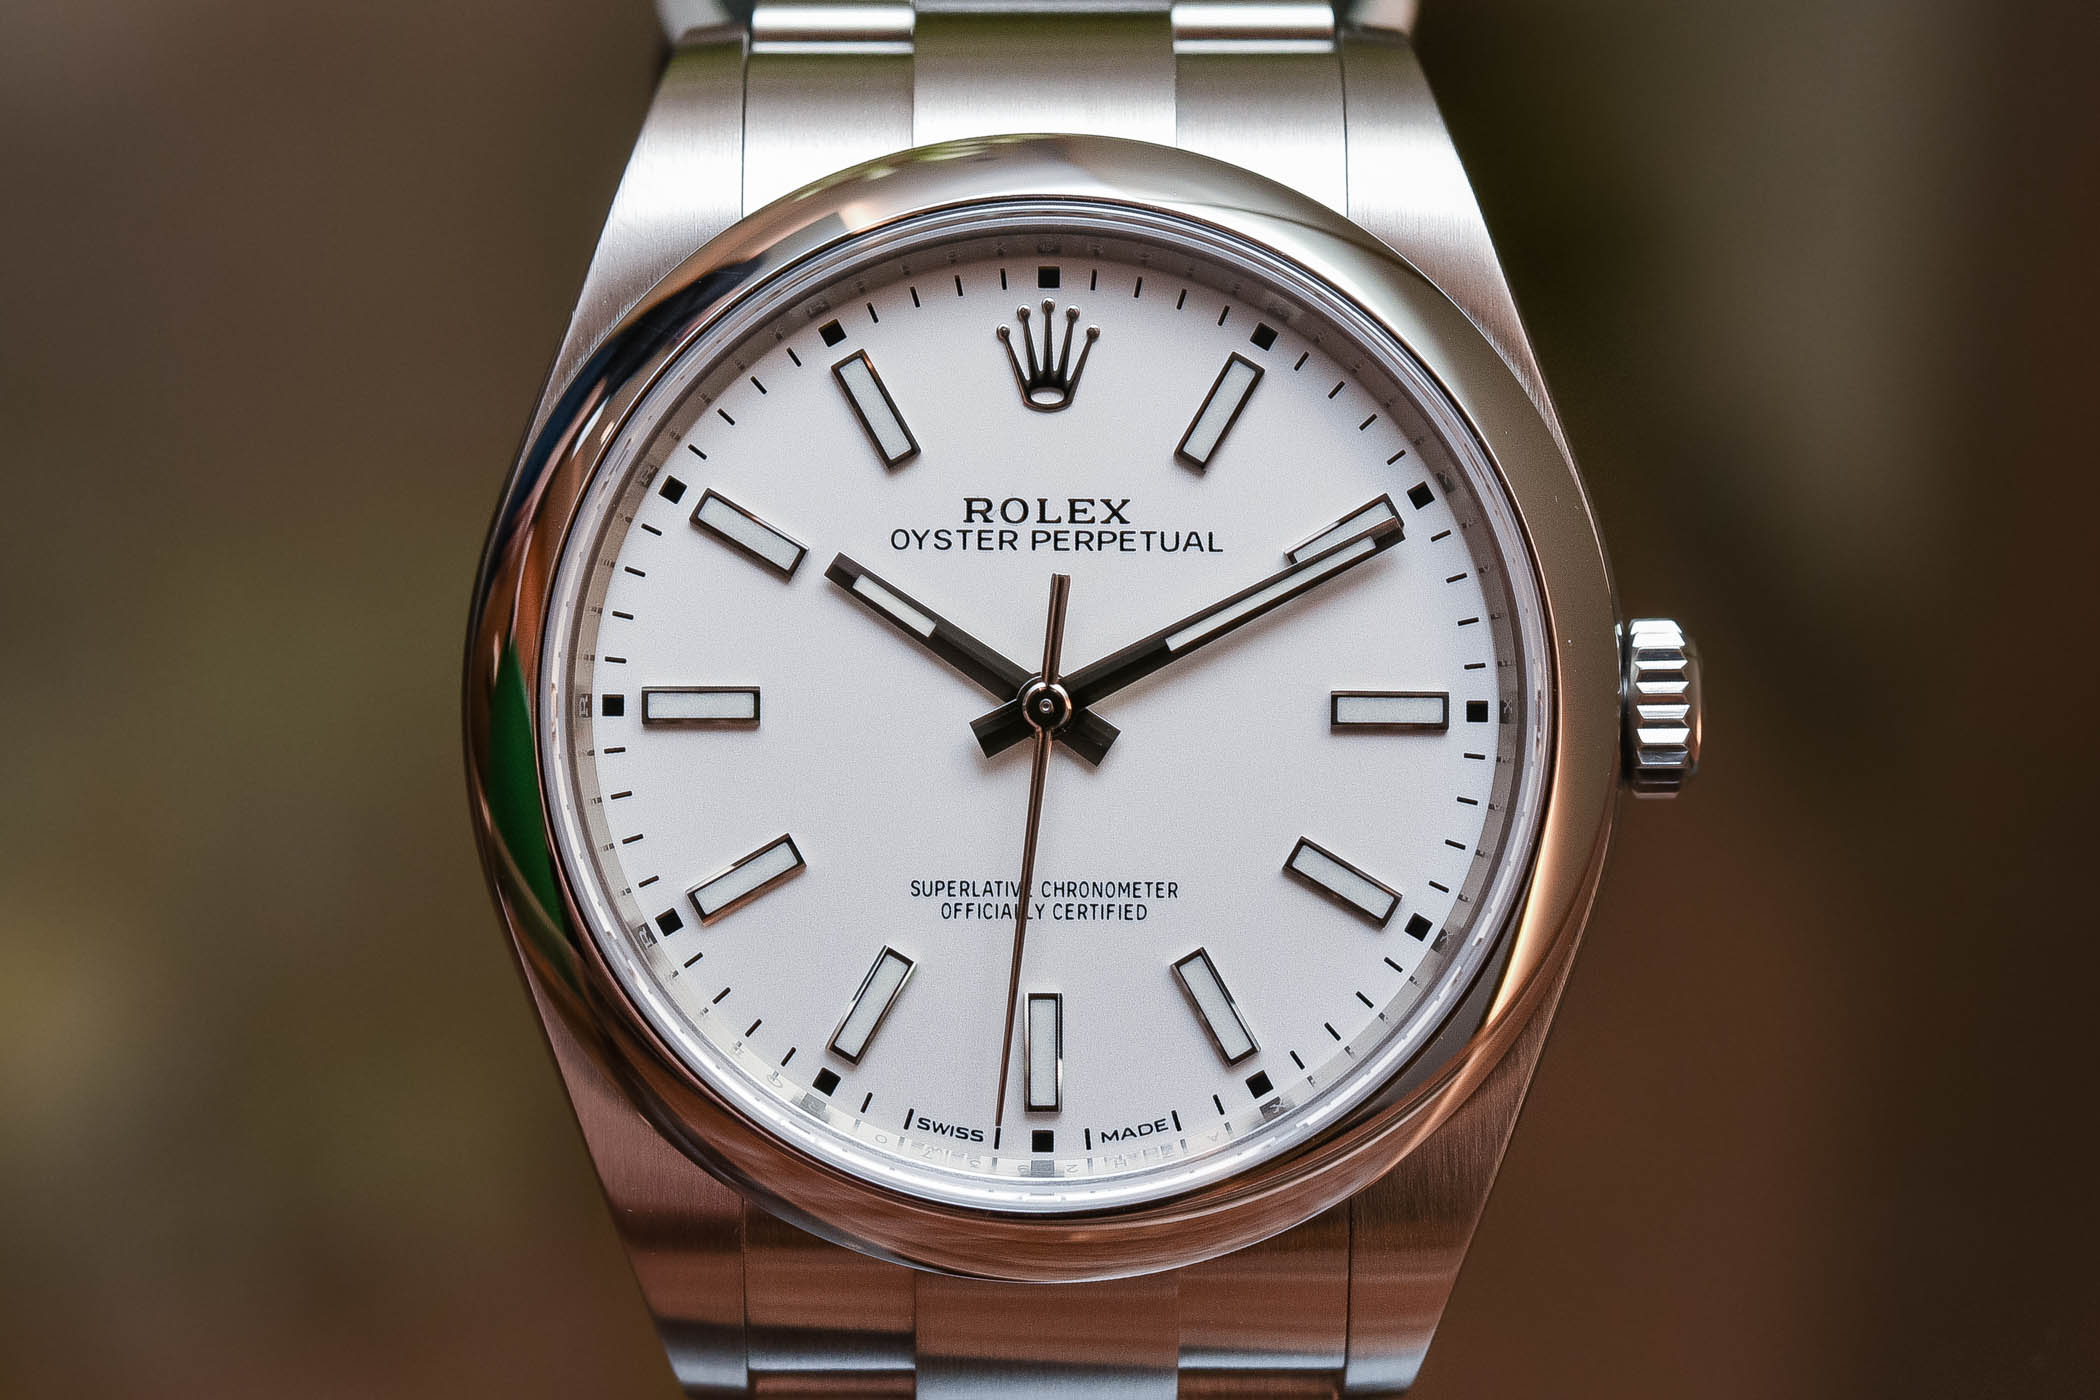 Rolex oyster perpetual 39 white review